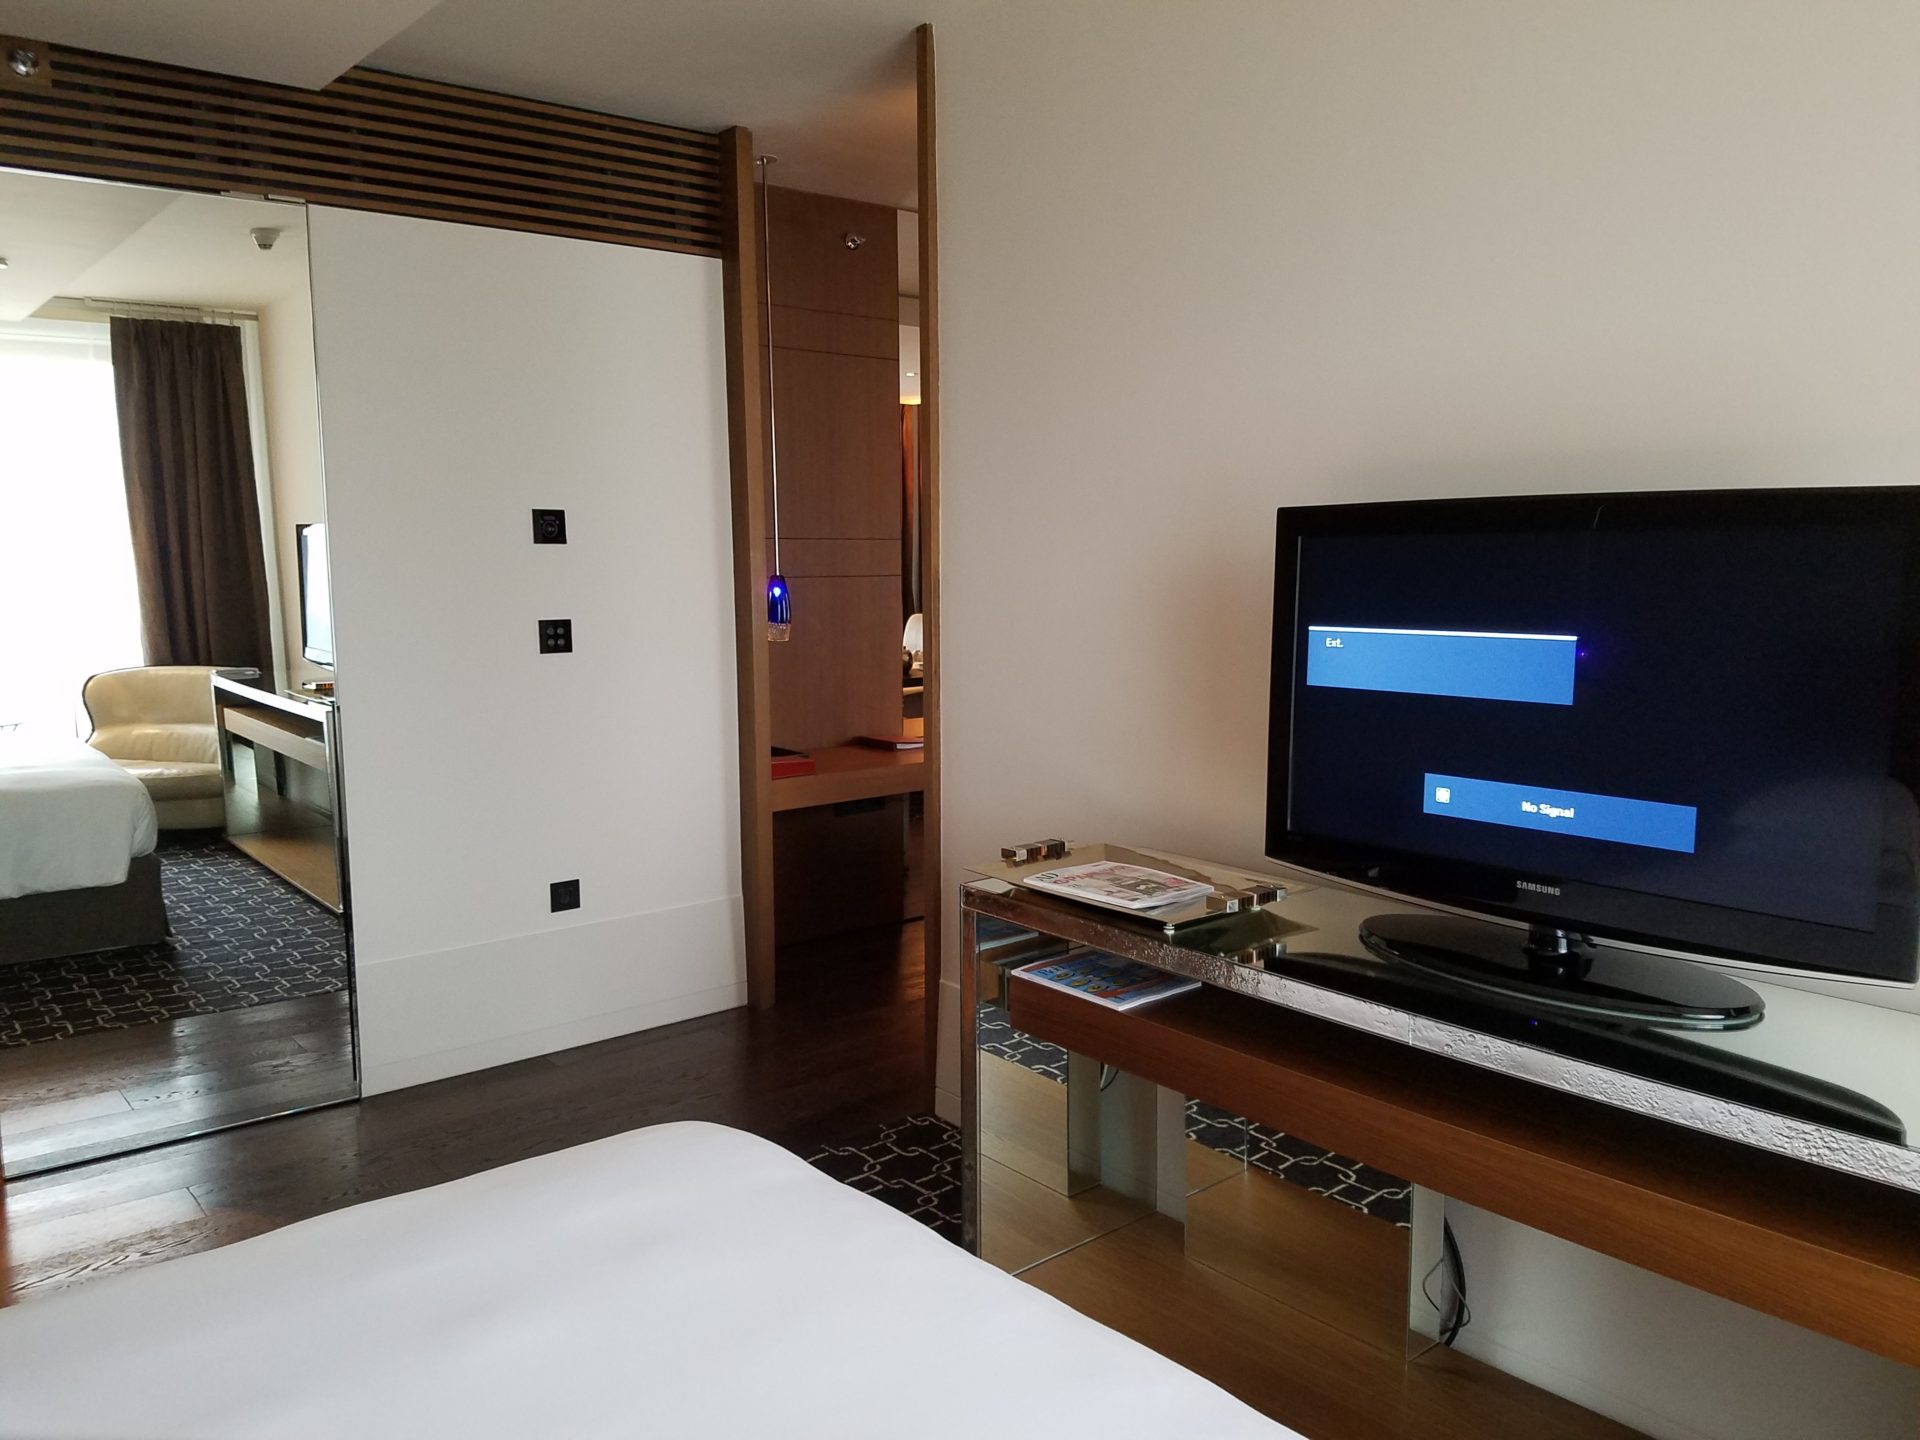 a tv on a table in a room